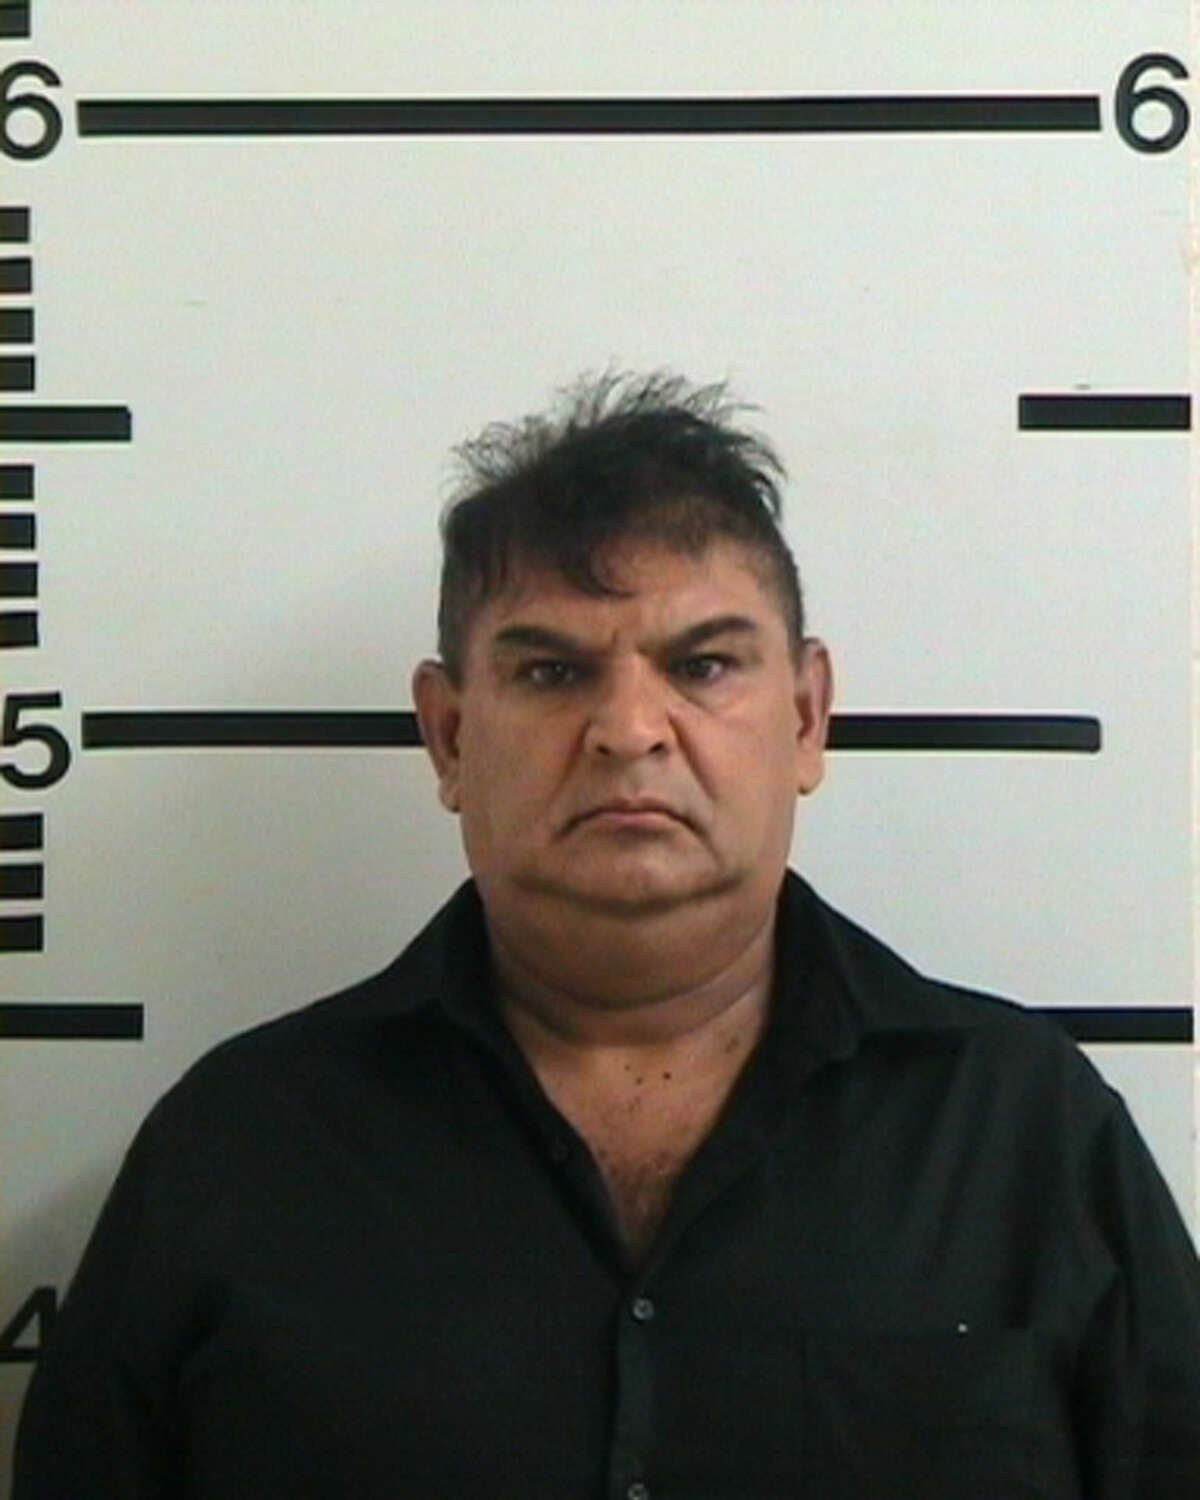 Isidro Lopez Jimenez, 53, allegedly killed wife Anjelica Jimenez, 37, and hid her body for more than a year before being caught.